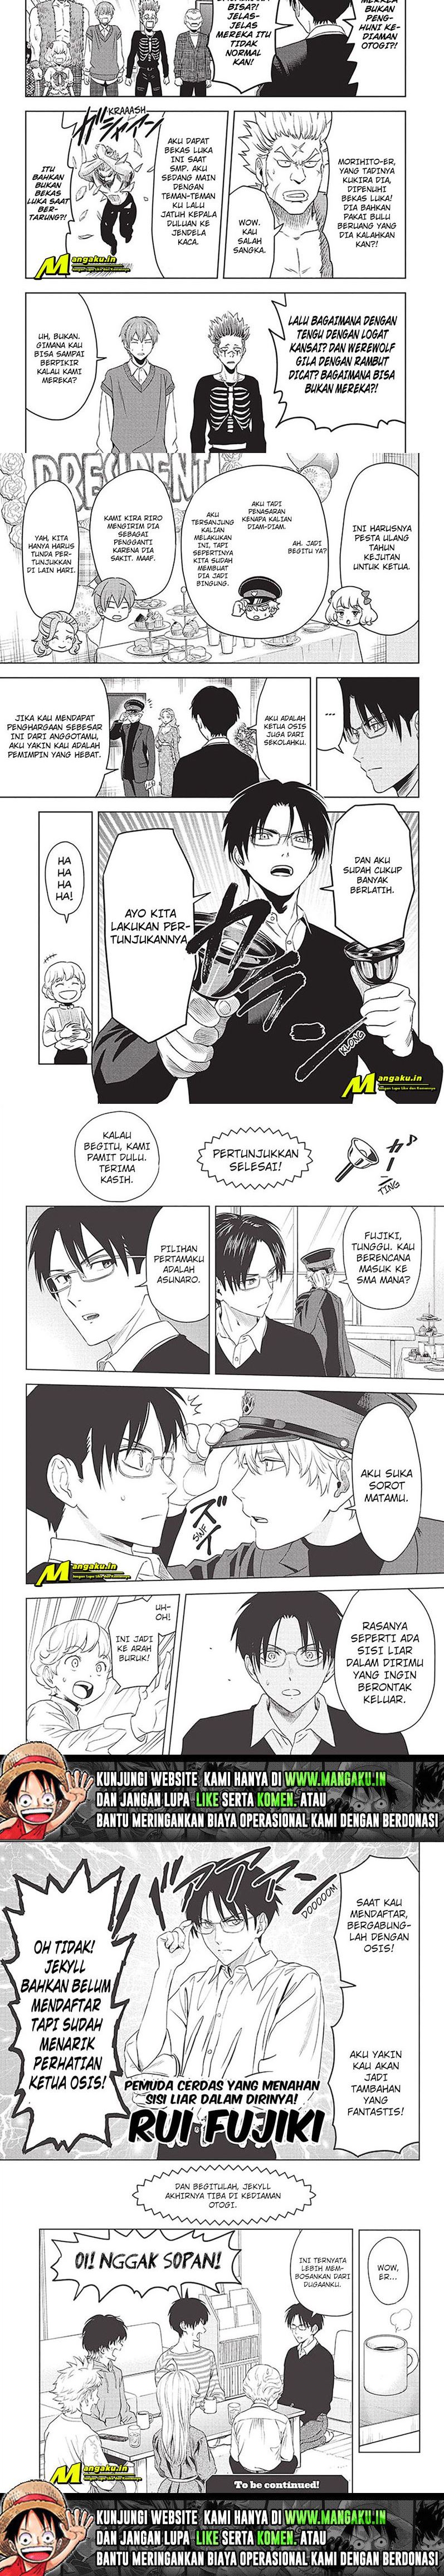 Witch Watch Chapter 74 Bahasa Indonesia